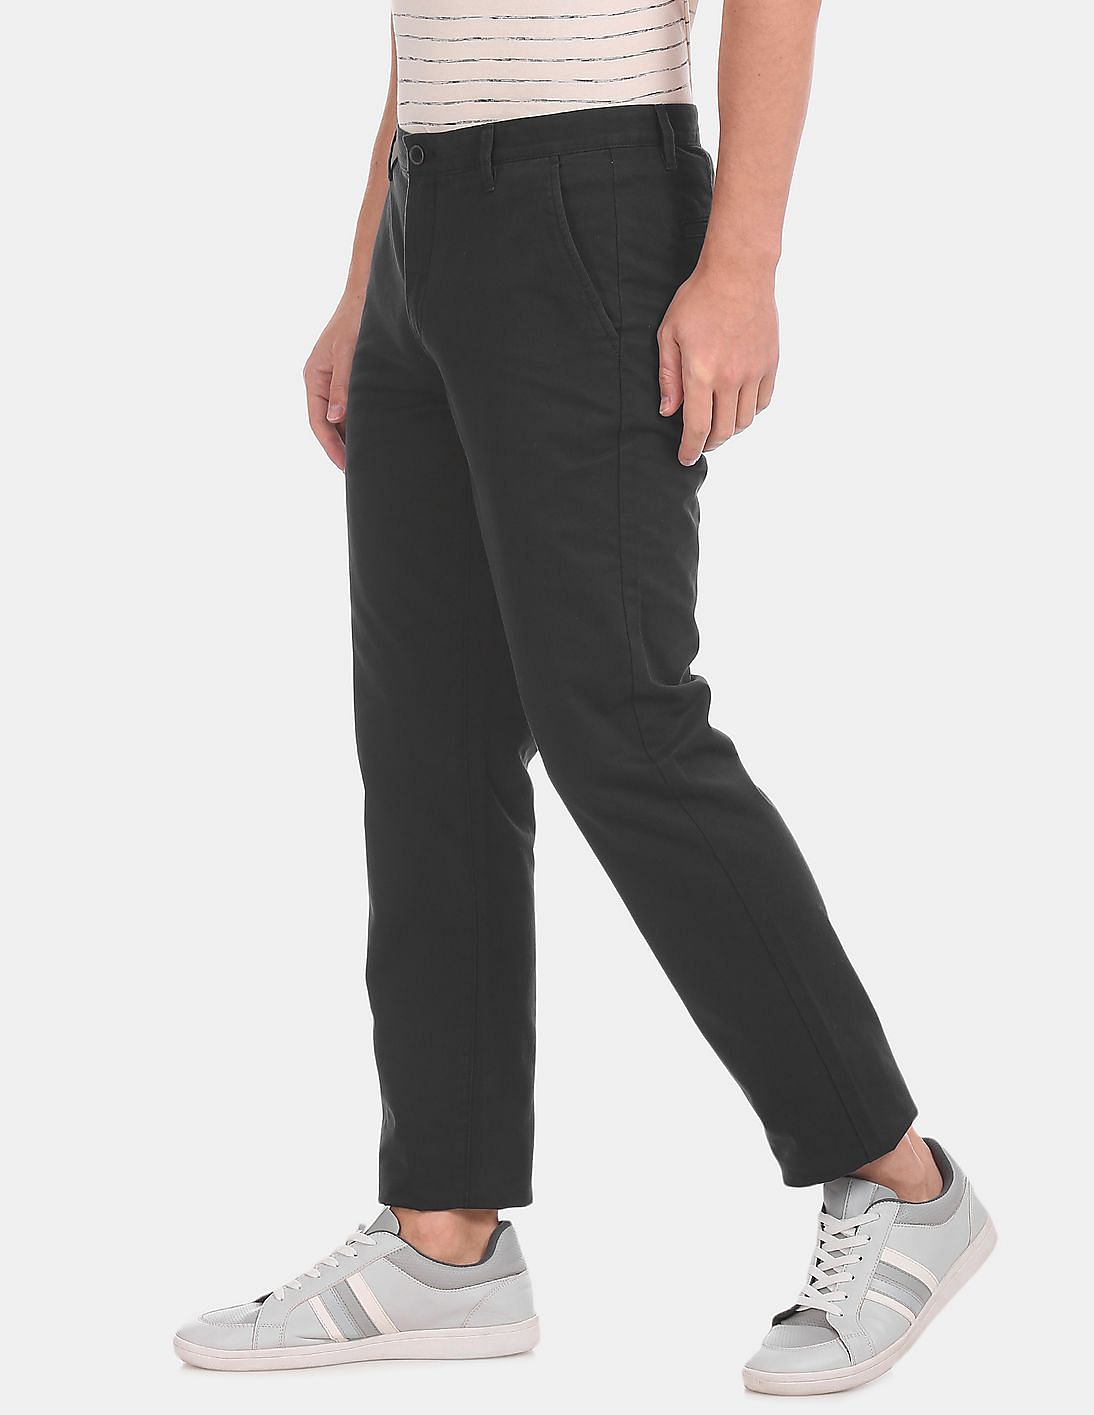 Buy Arrow Sports Black Chrysler Slim Fit Solid Casual Trousers - NNNOW.com